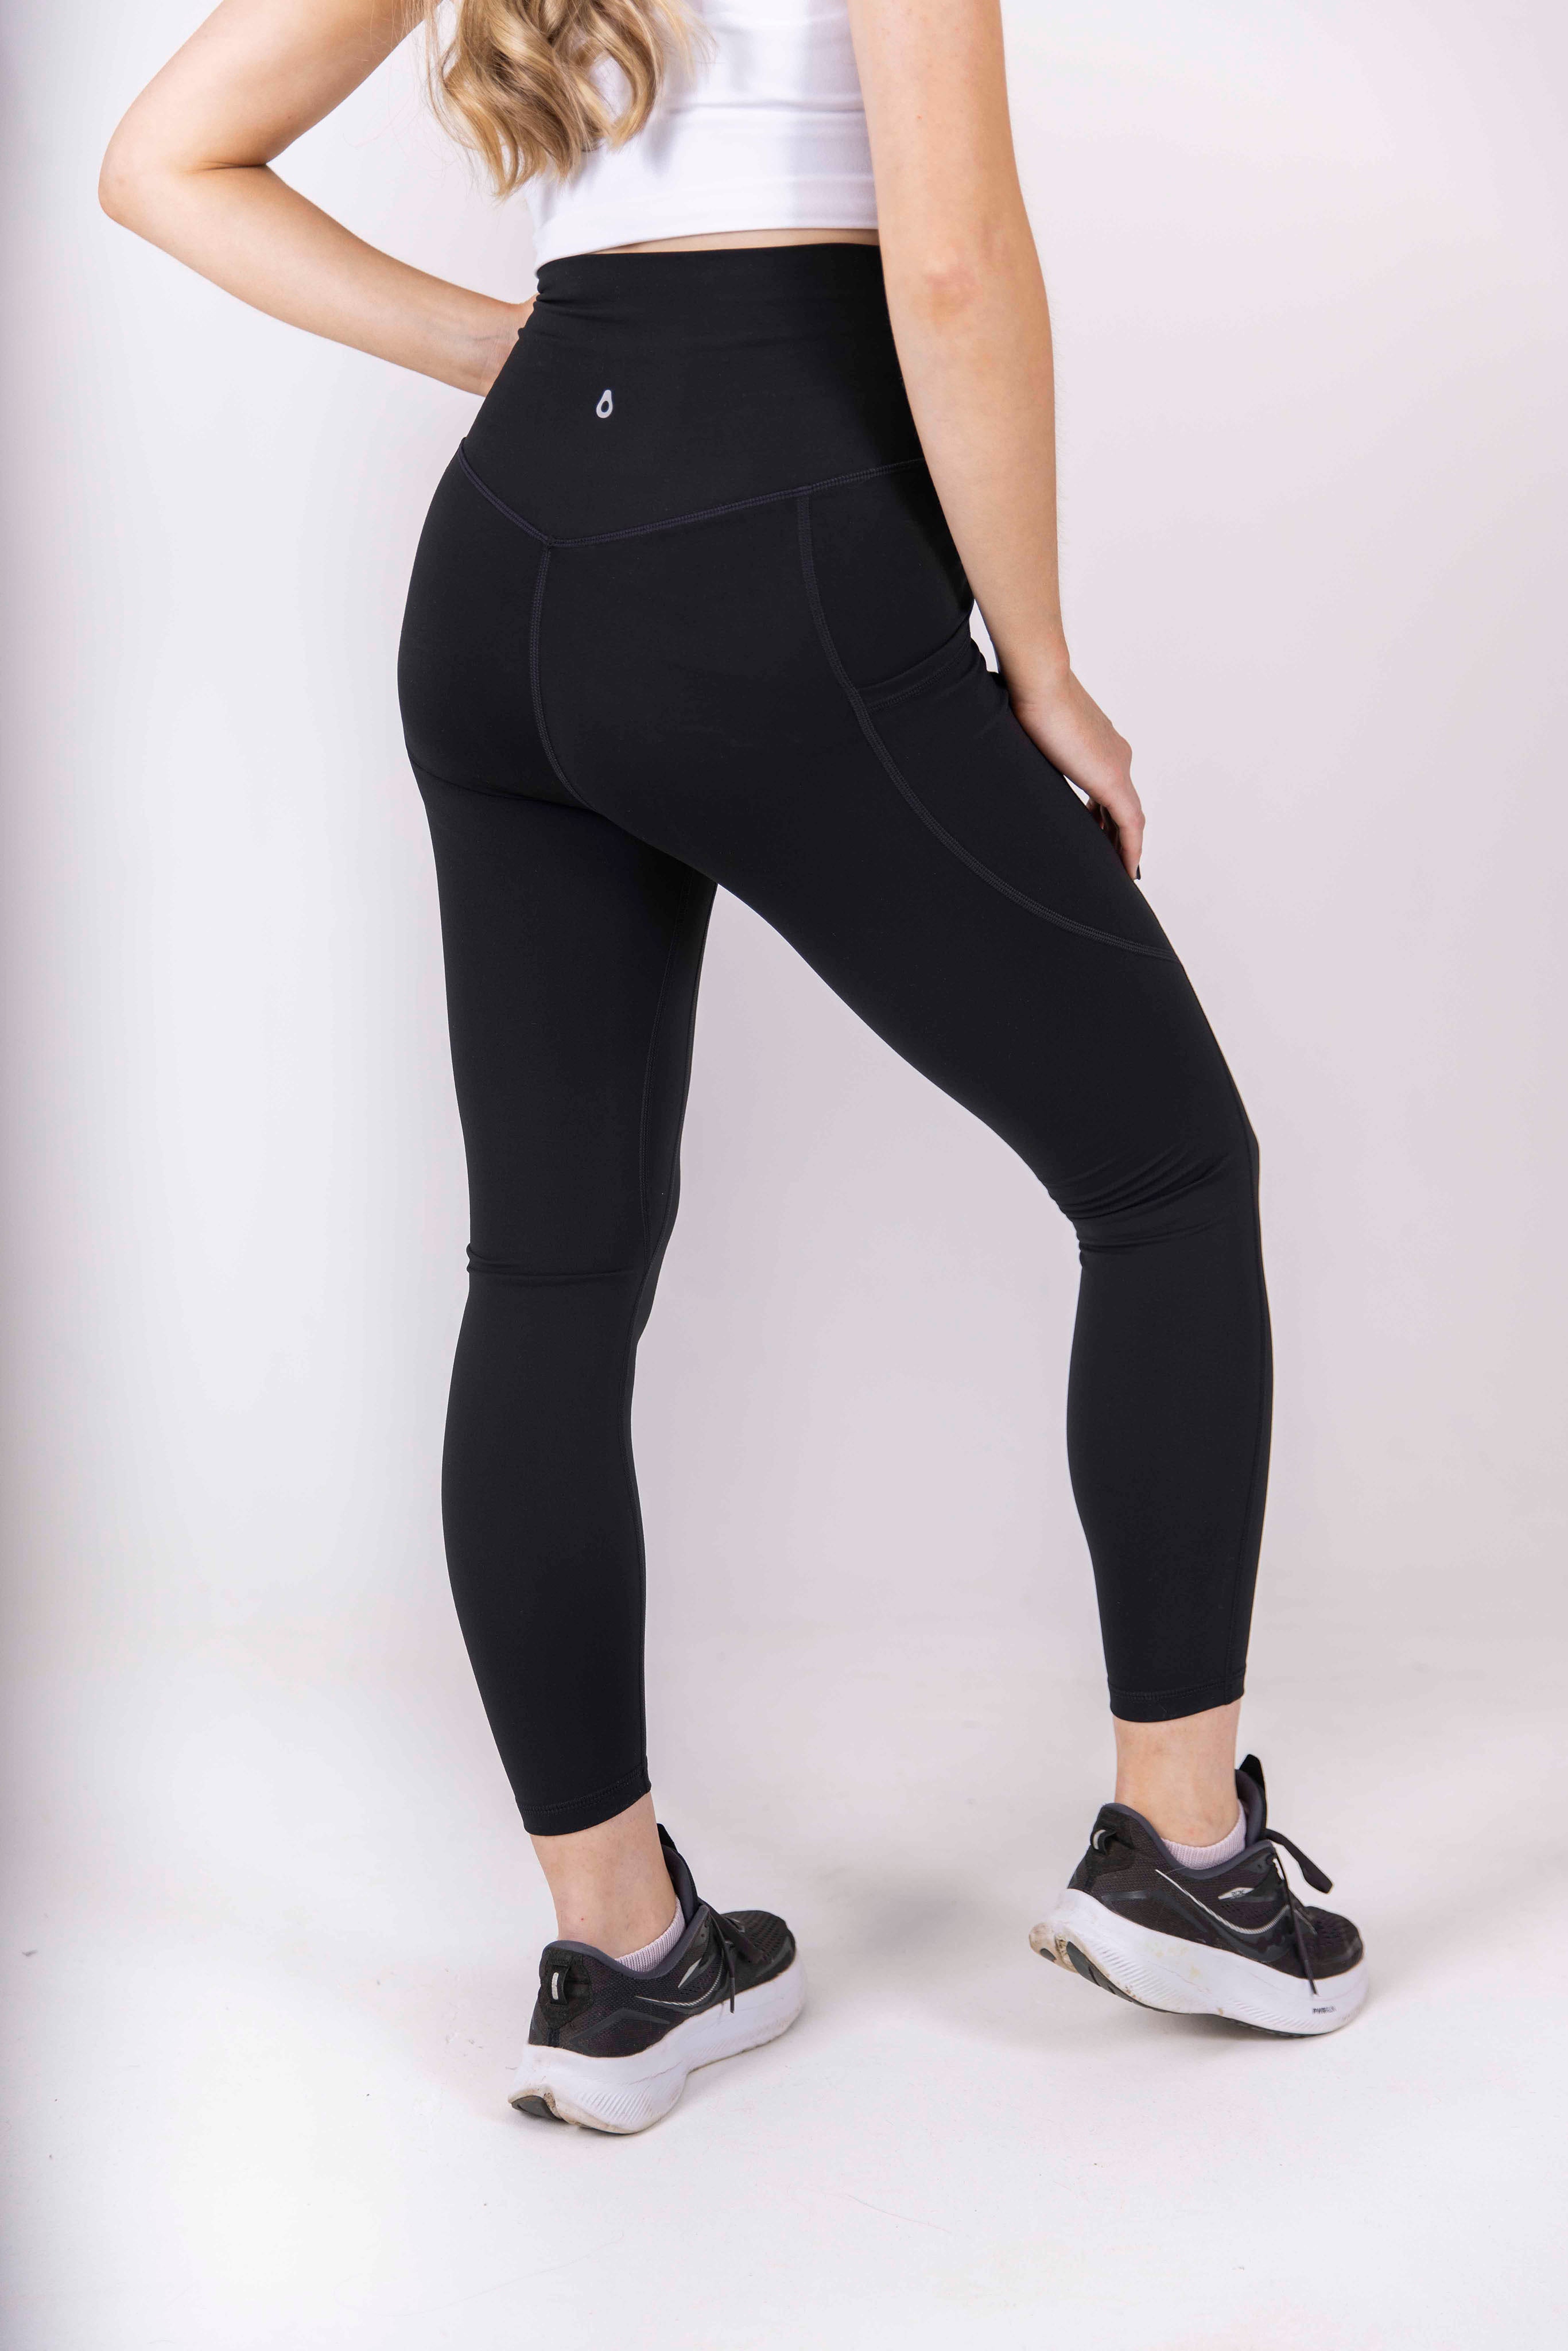 HLTPRO 1/3 Pack Maternity Leggings Over The Belly - Maternity Pants with  Pockets for Women Pregnancy Workout Yoga Leggings Black/Black/Black at   Women's Clothing store